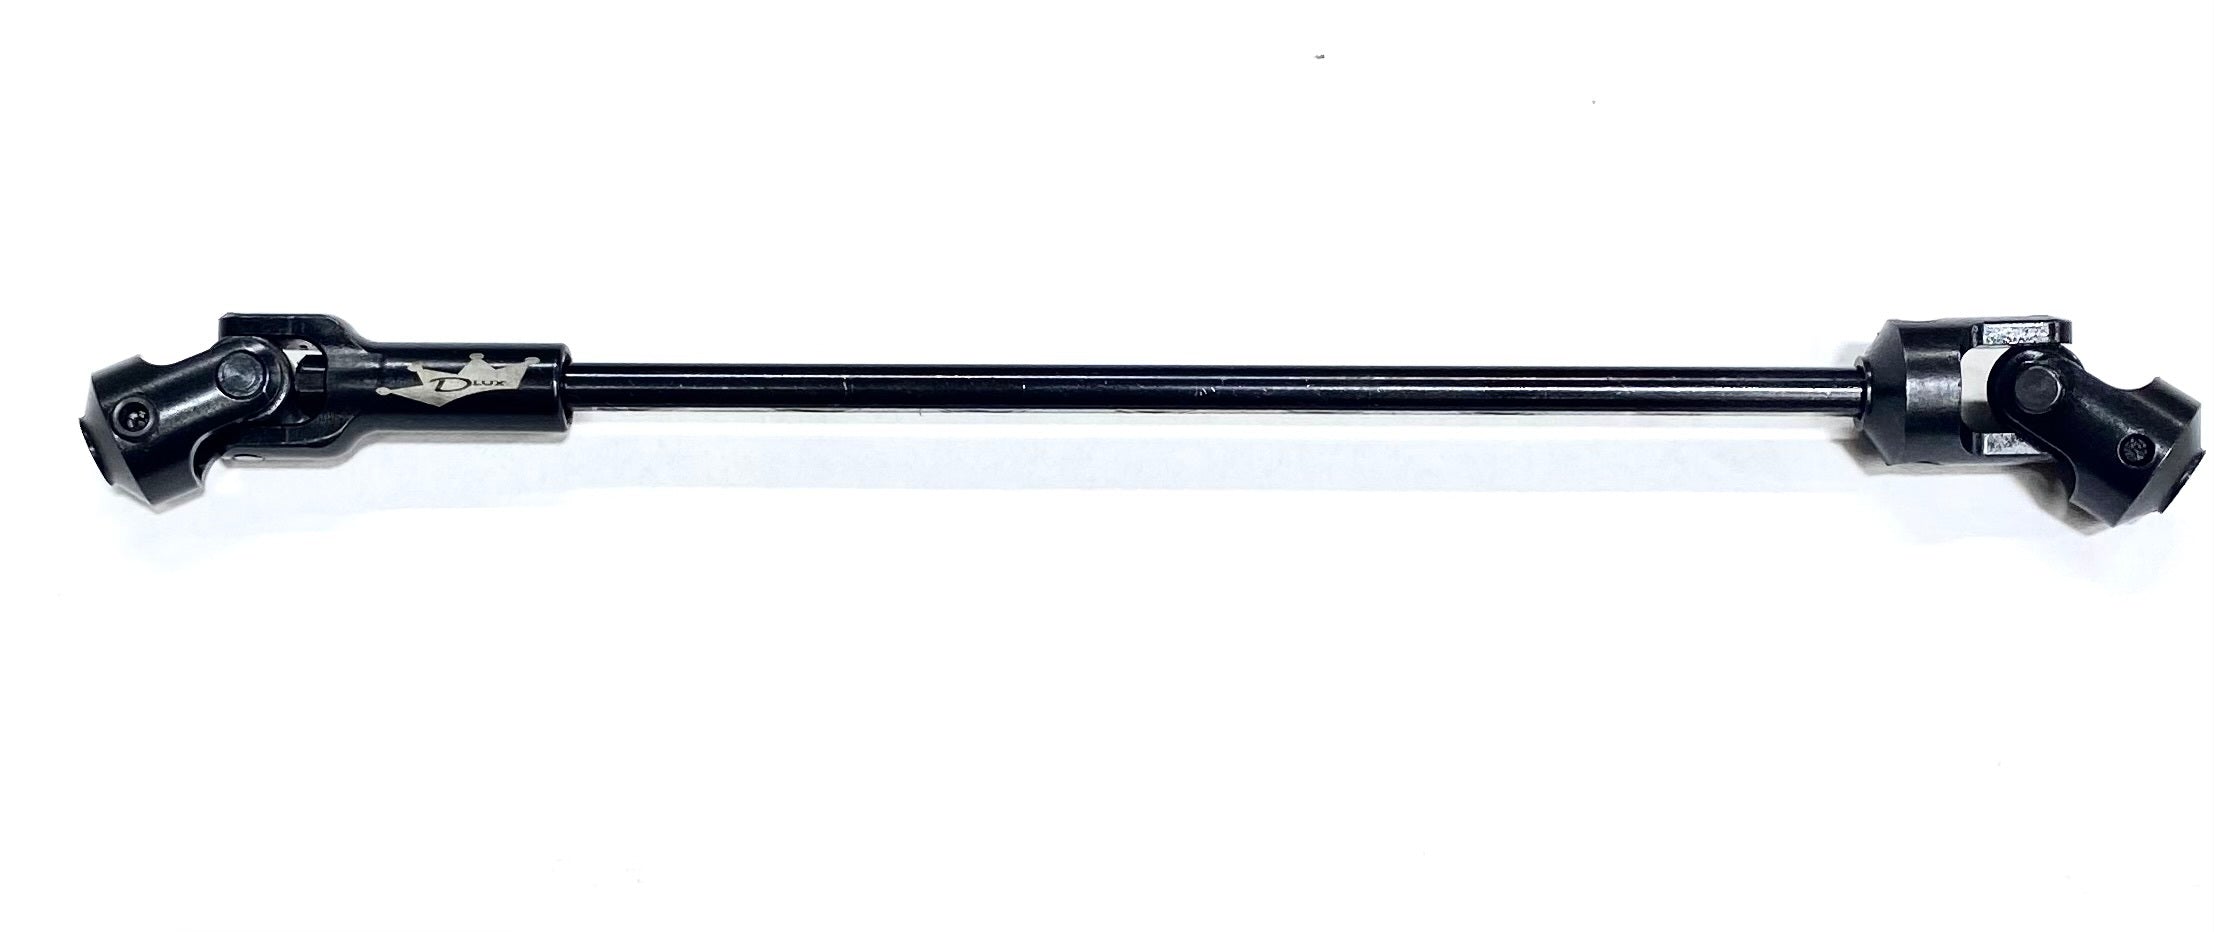 Dlux Cut-to-Length Driveshaft